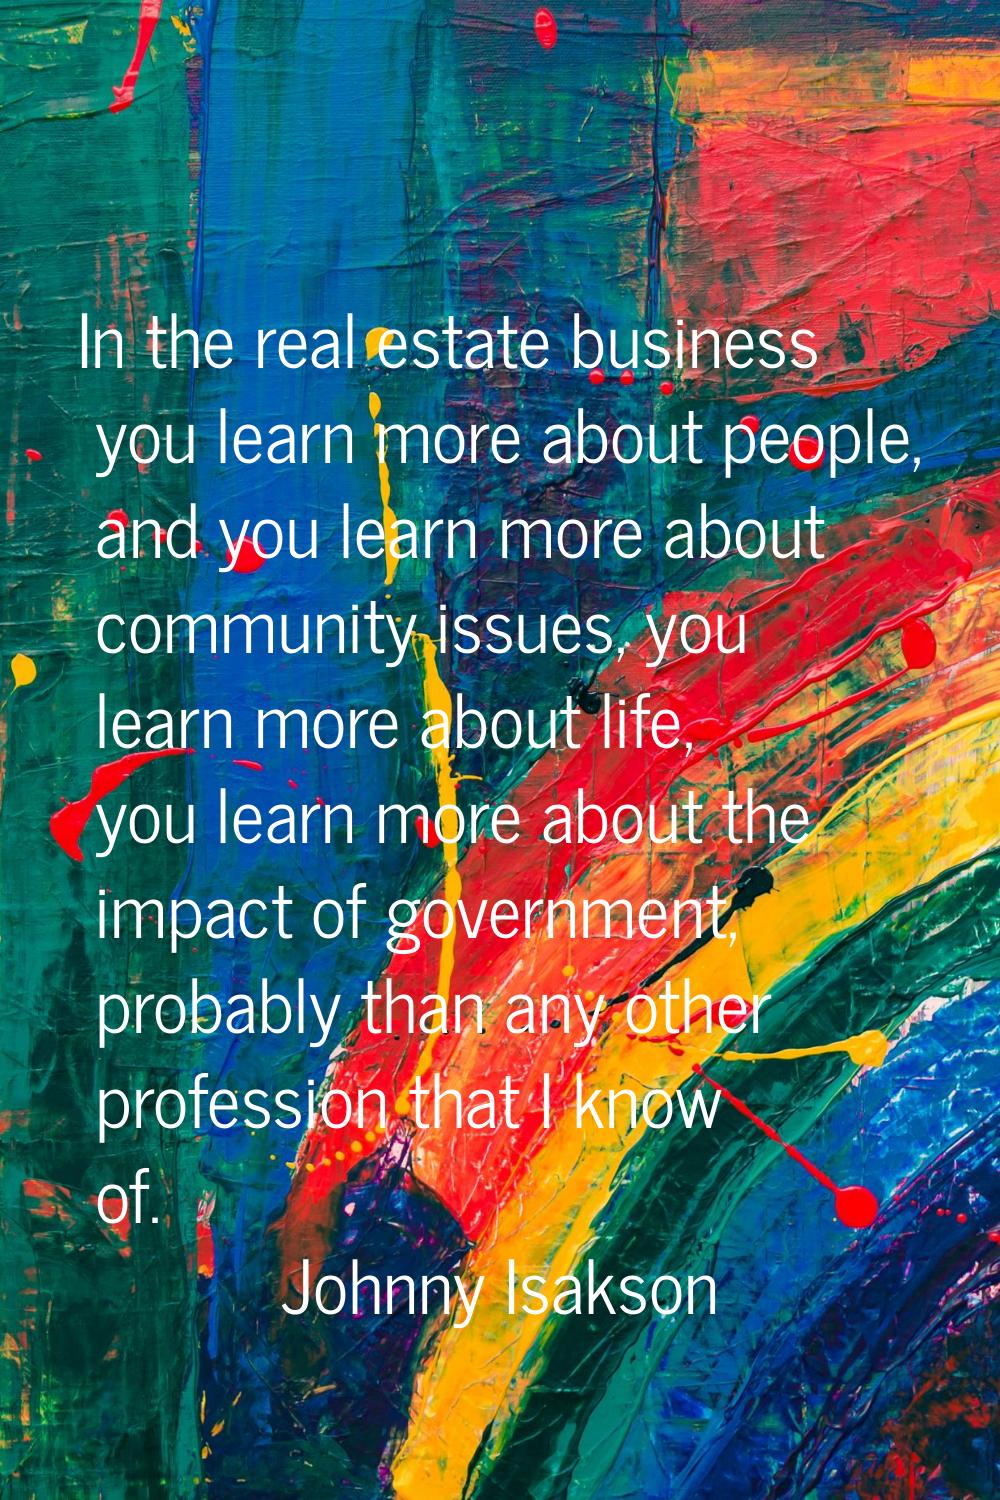 In the real estate business you learn more about people, and you learn more about community issues,